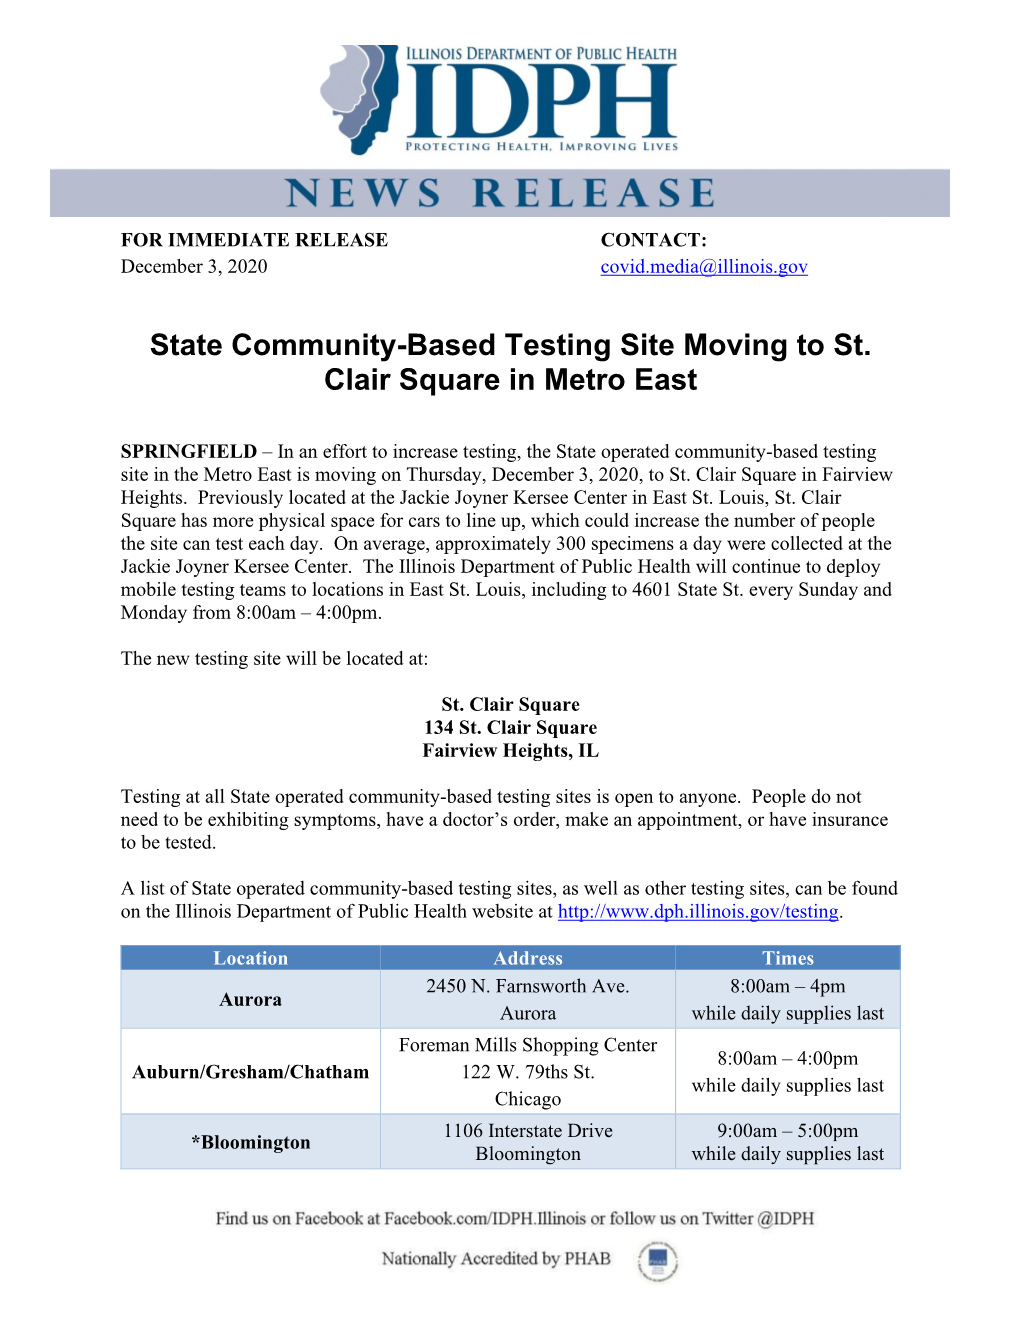 State Community-Based Testing Site Moving to St. Clair Square in Metro East